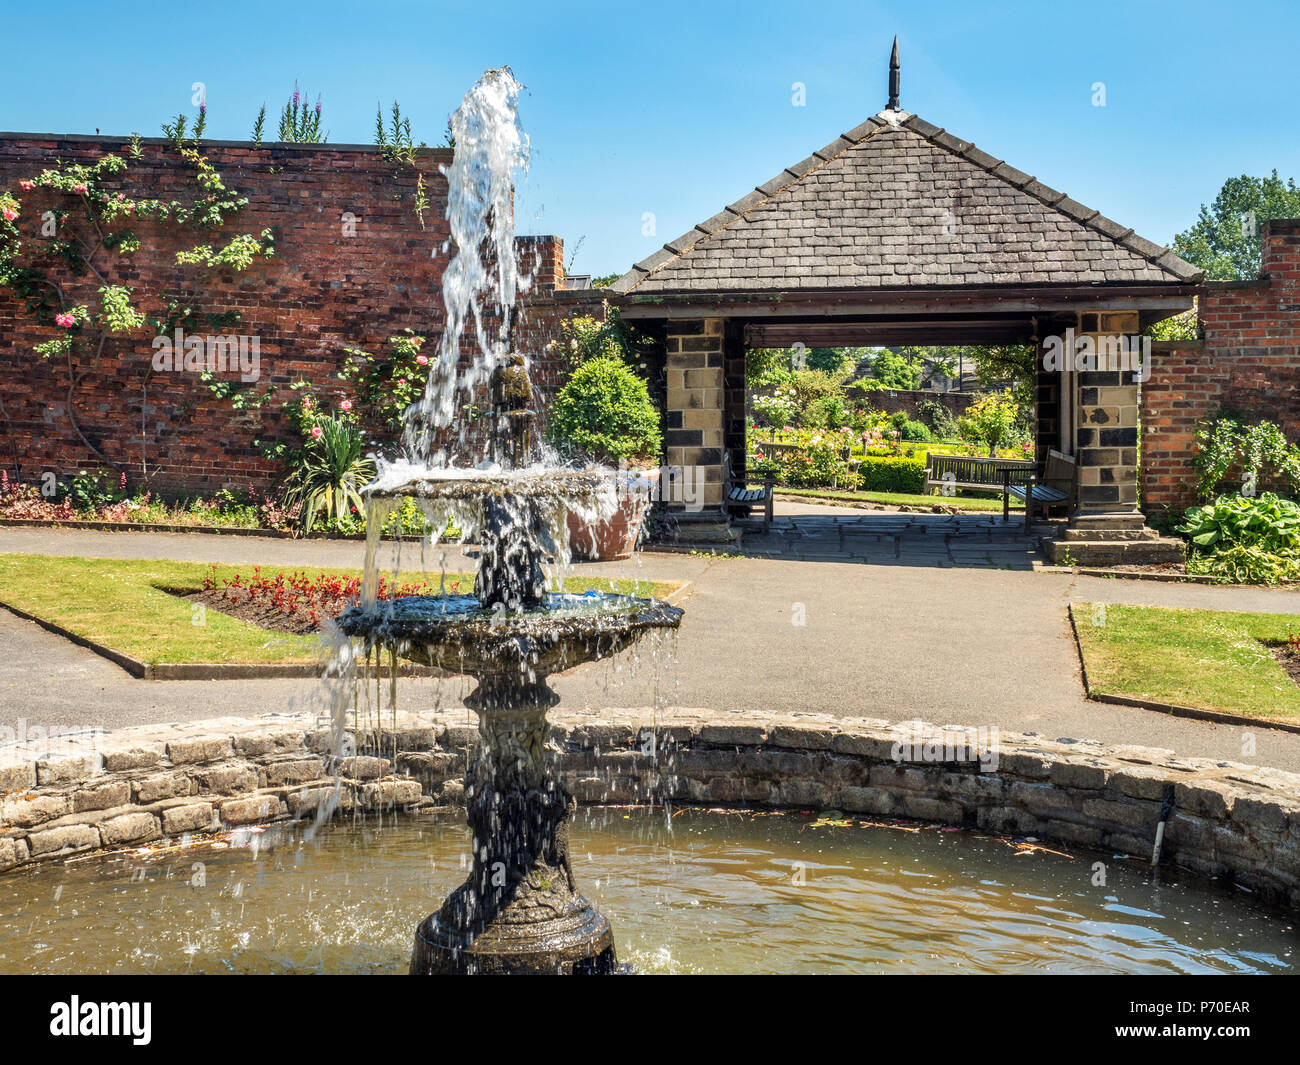 Fountain in a walled garden at Roundhay Park Roundhay Leeds West Yorkshire England Stock Photo